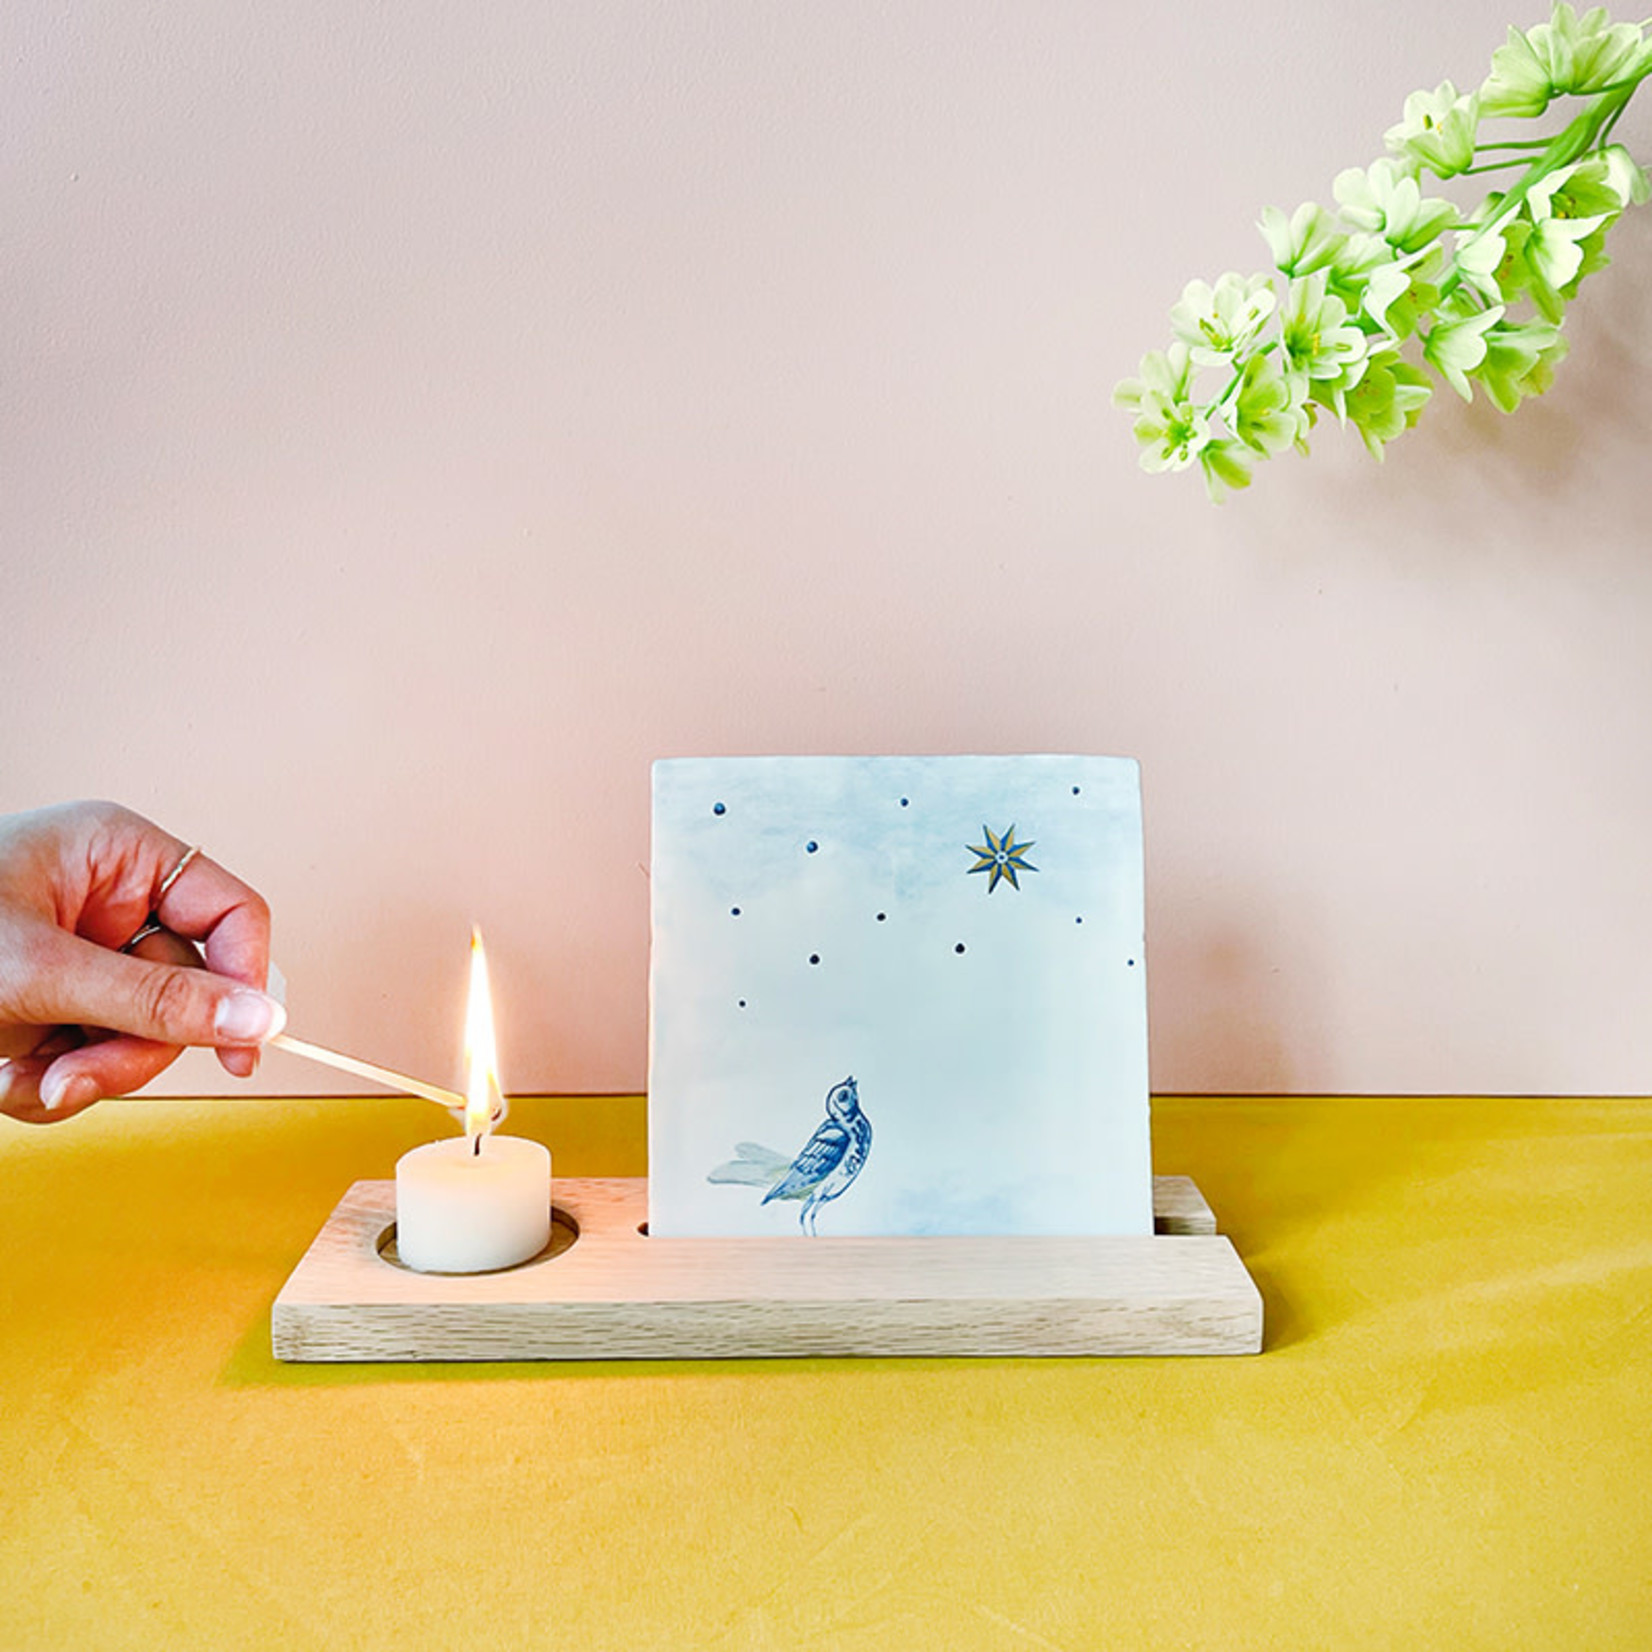 StoryTiles Tile & Candle holder | Accessories | One size